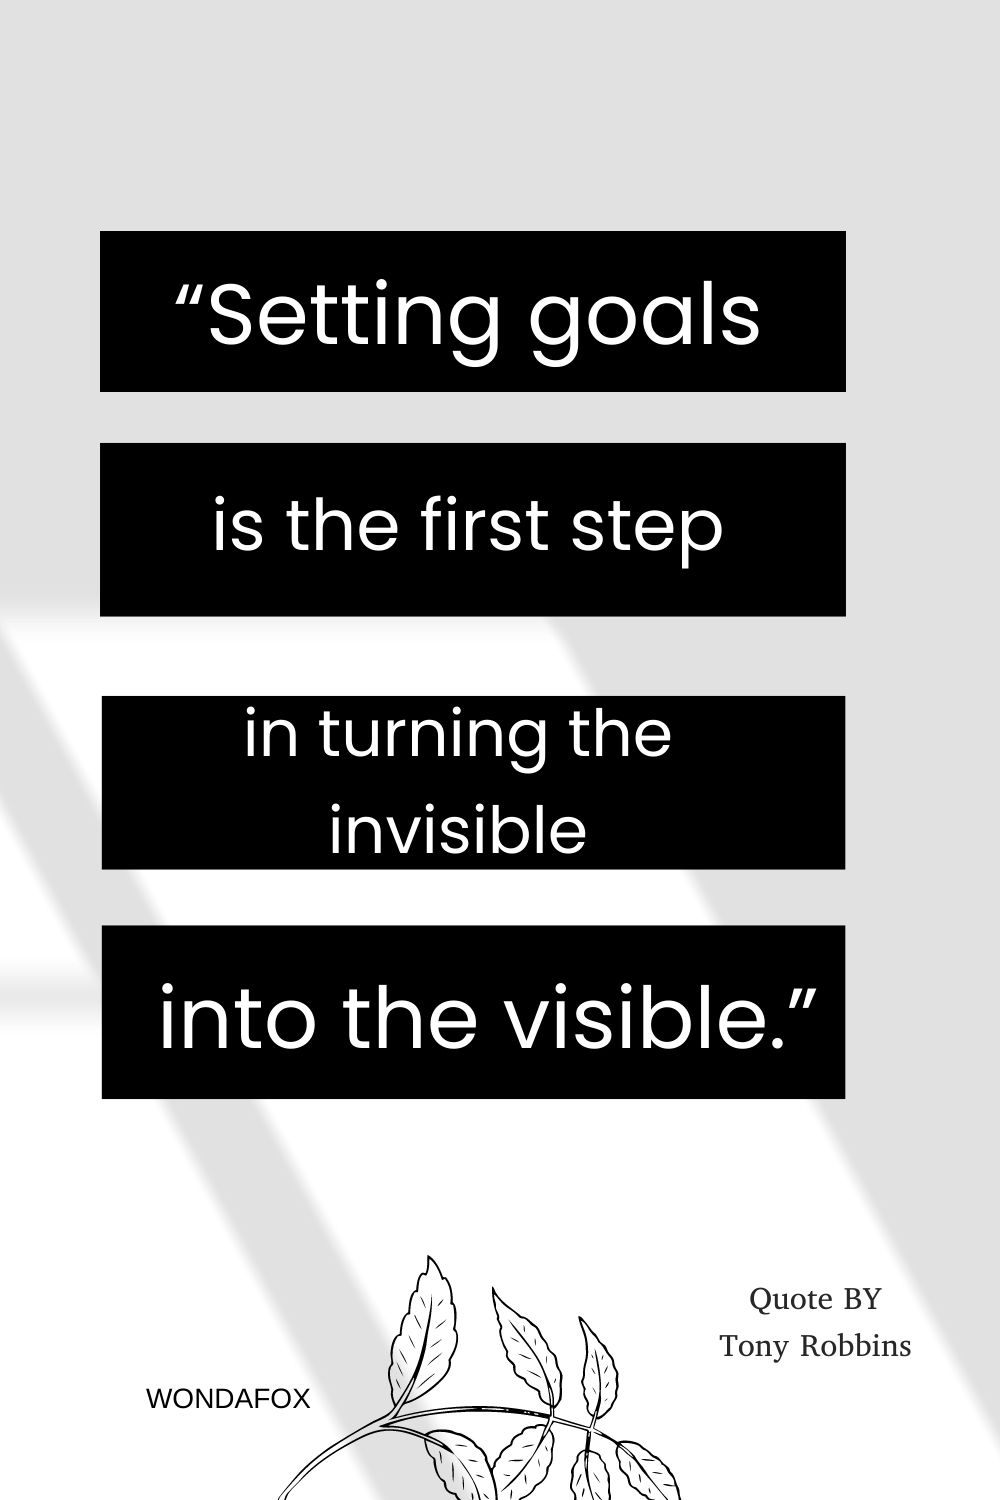 “Setting goals is the first step in turning the invisible into the visible.”
Tony Robbins